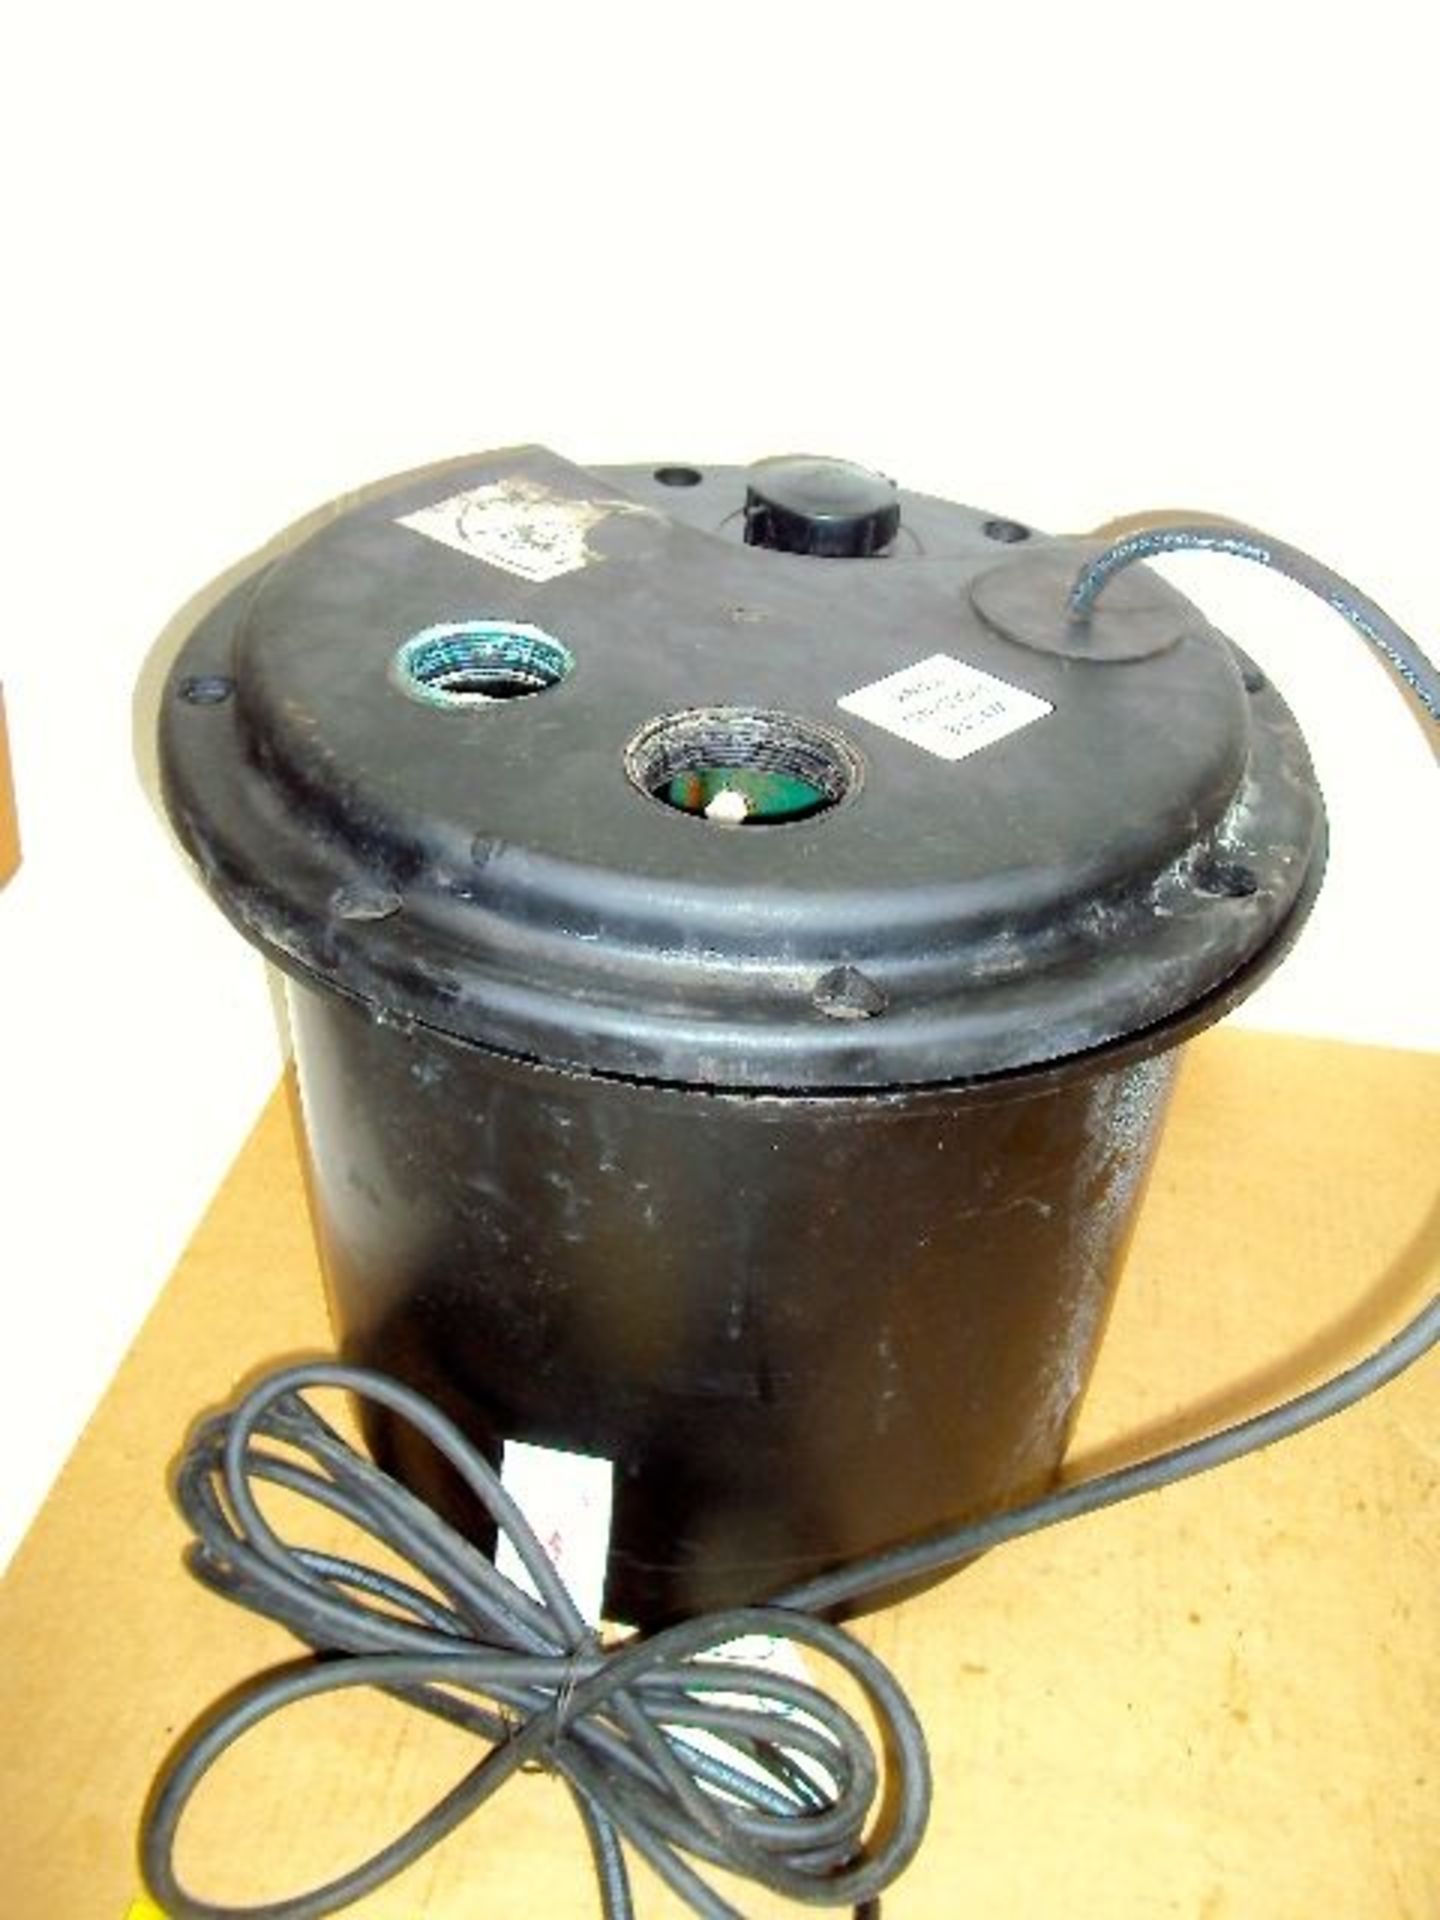 Zoeller M98-B Sump Pump and Holding Tank /291 - Image 7 of 7